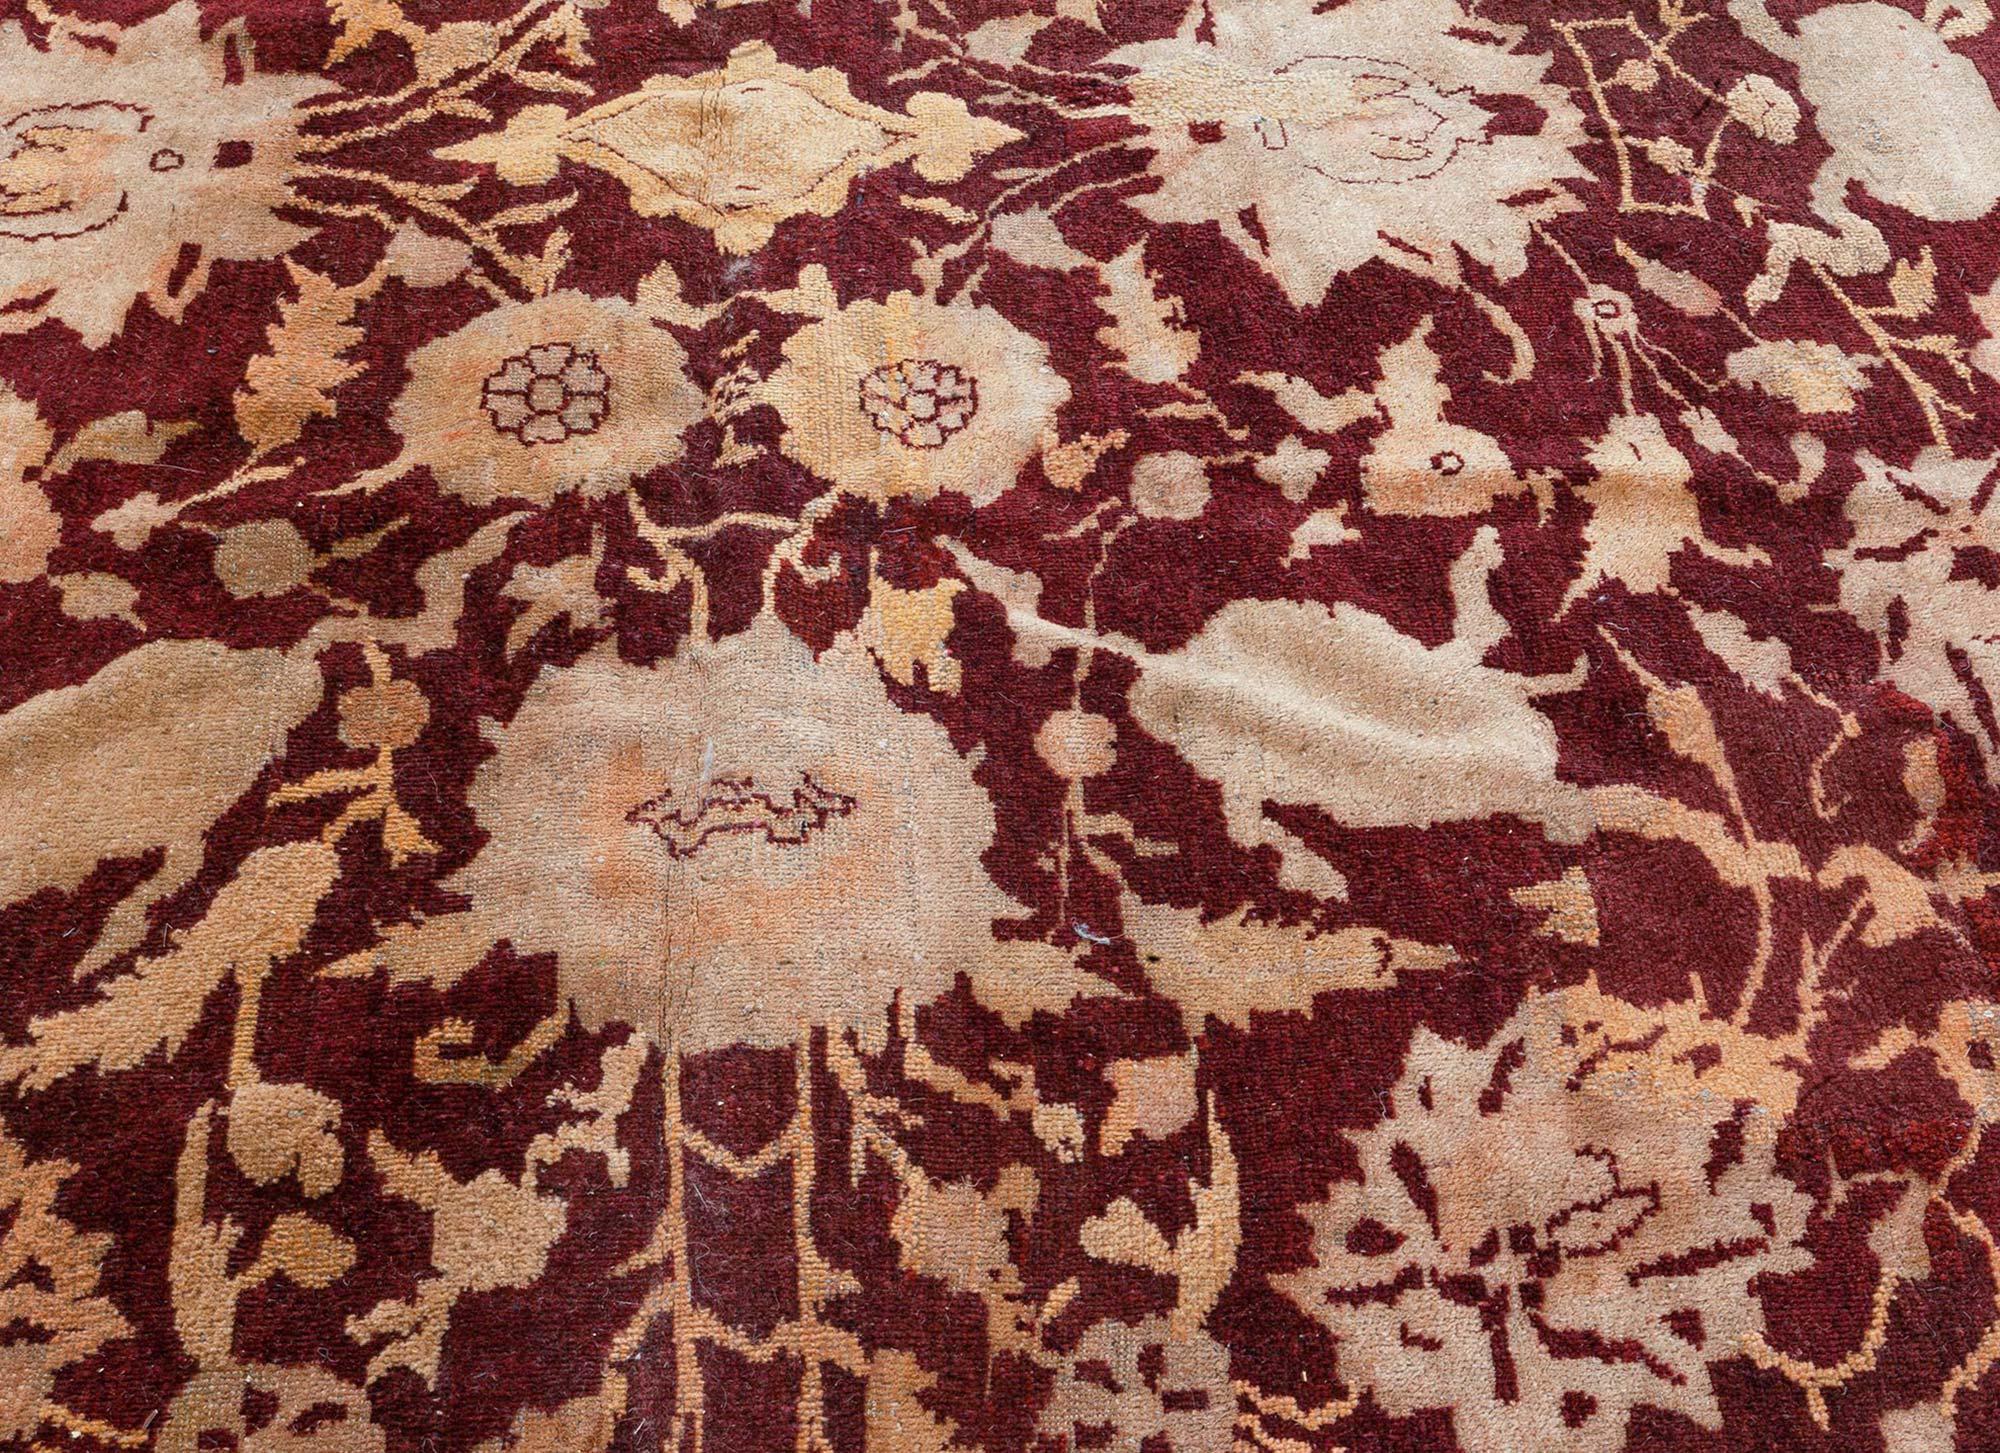 Hand-Knotted Antique Indian Amritsar Red and Beige Wool Carpet